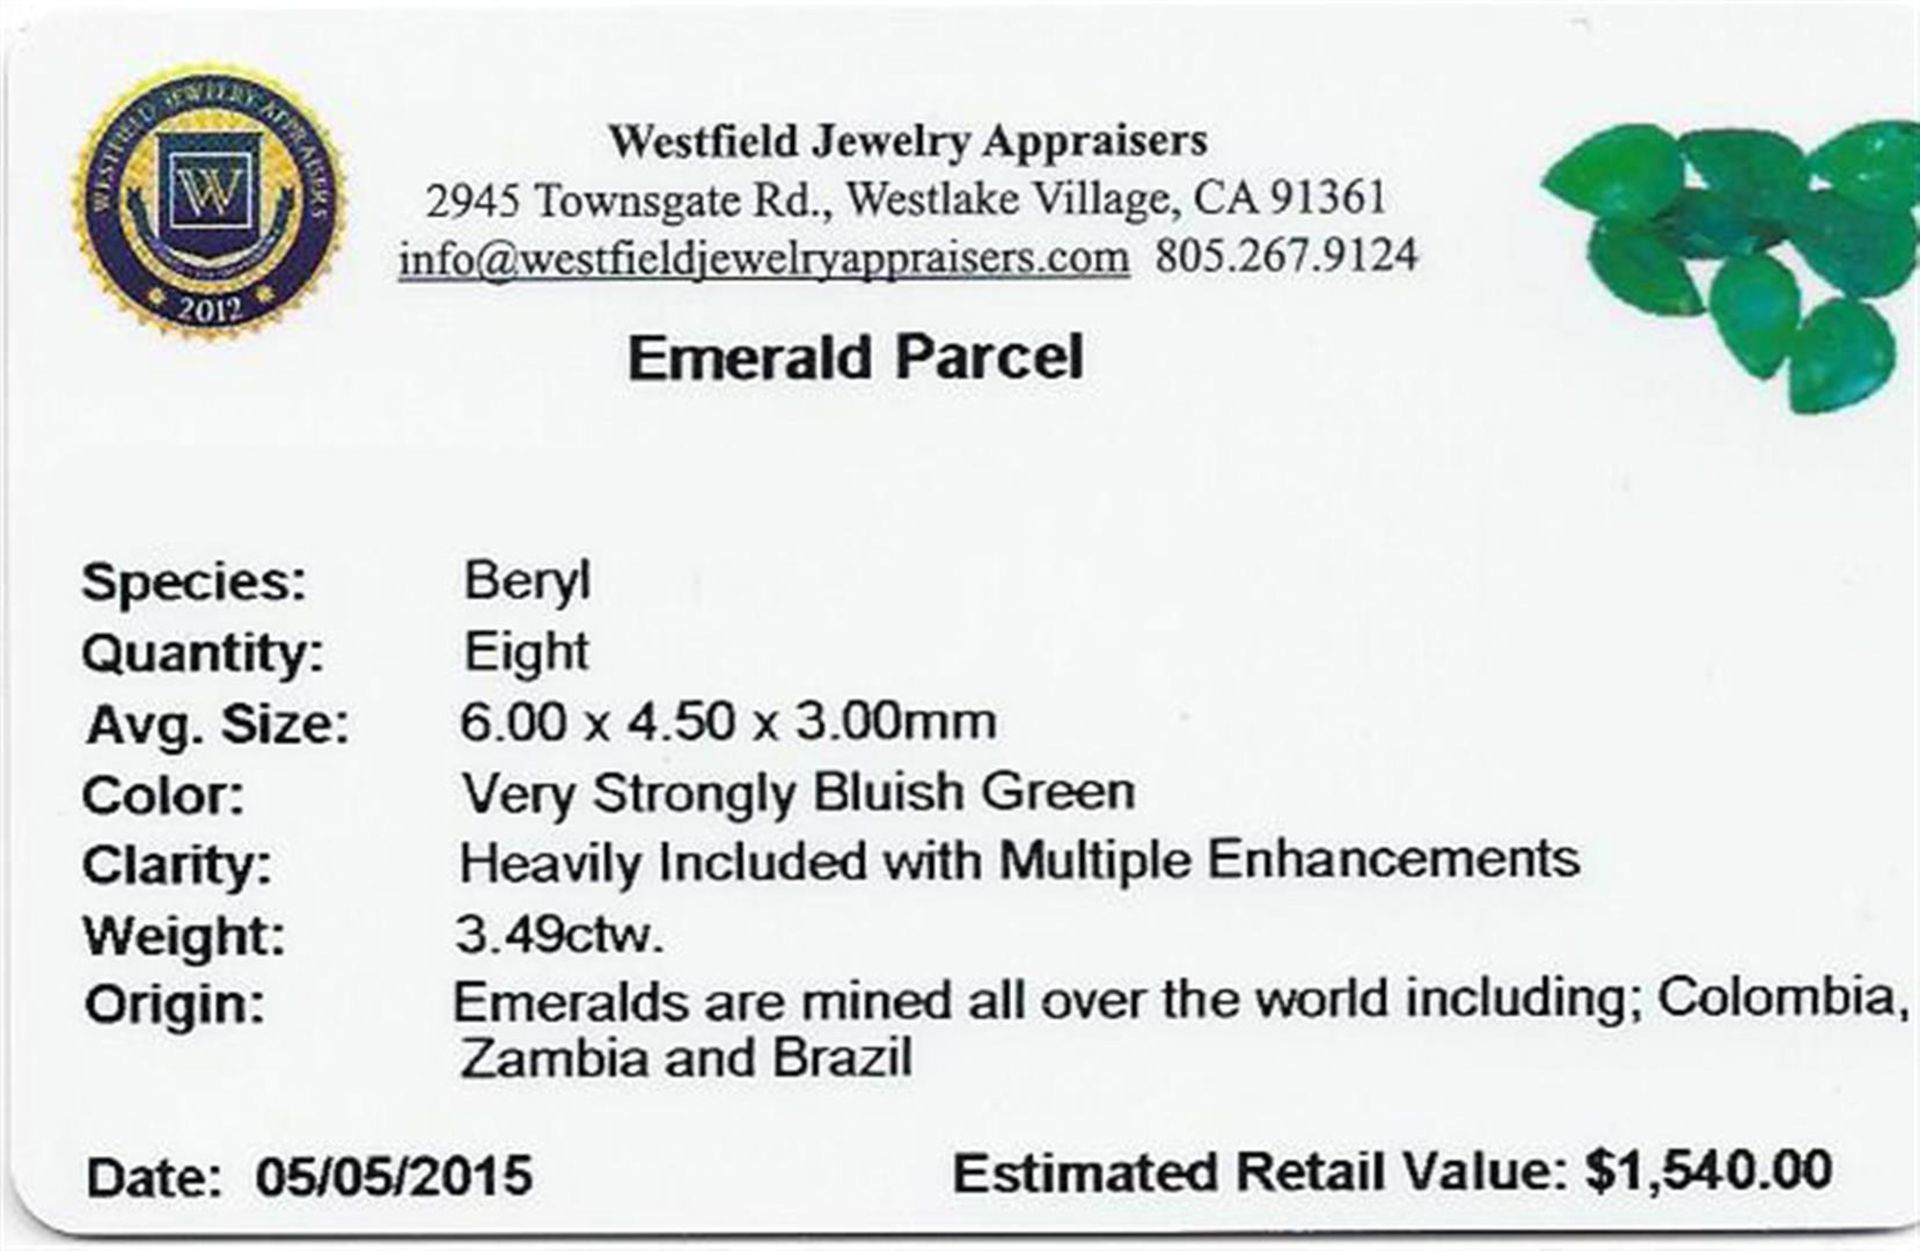 3.49 ctw Pear Mixed Emerald Parcel - Image 2 of 2